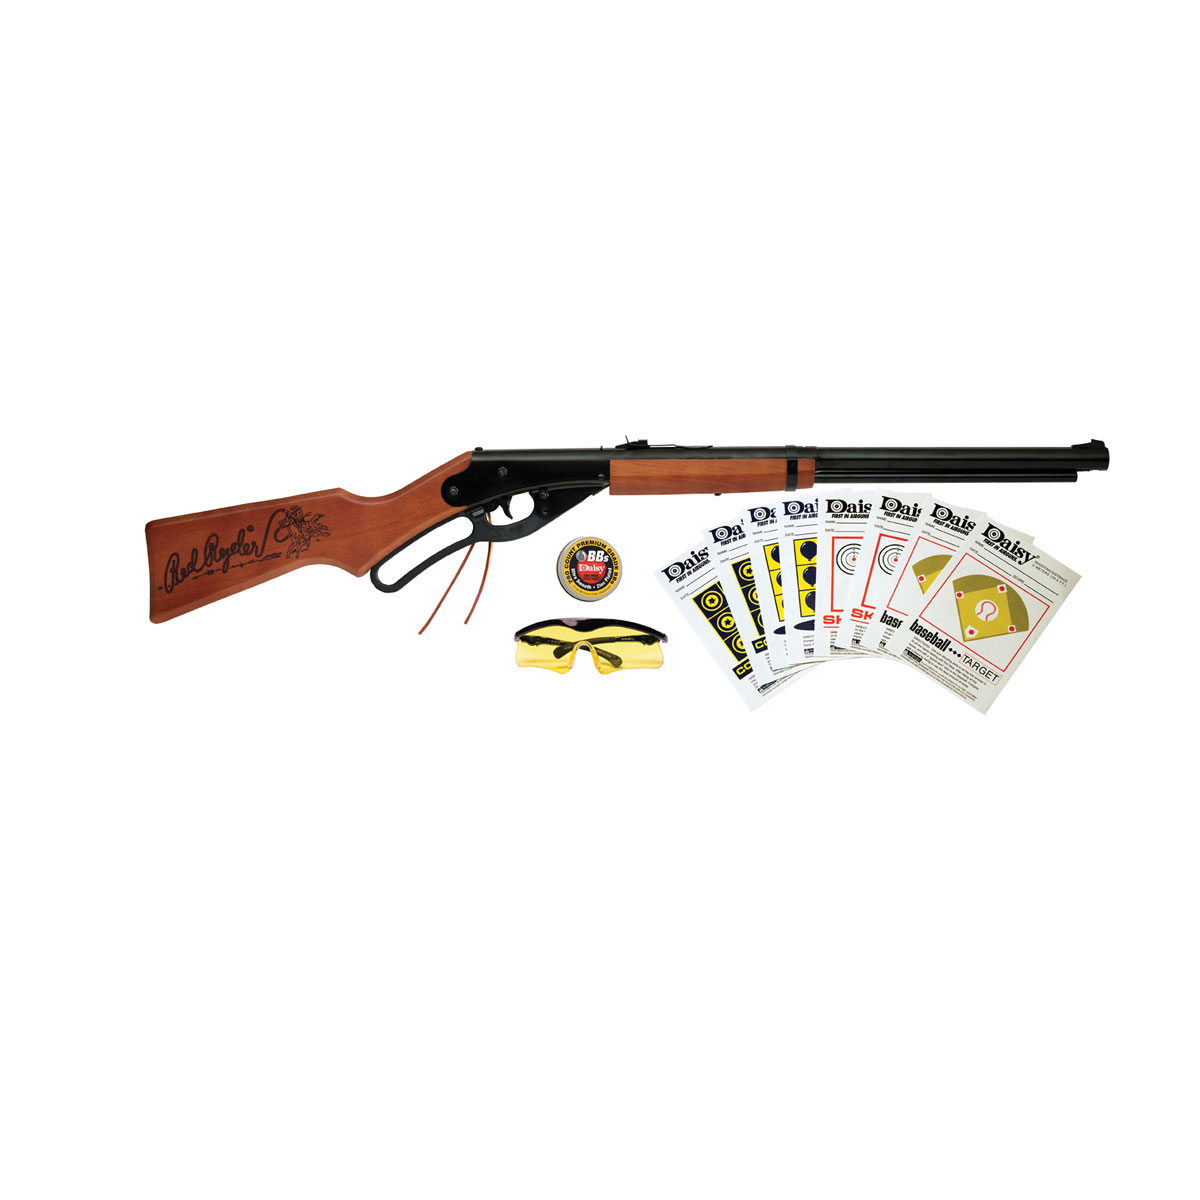 TARGETS & 700 BB'S Daisy RED RYDER Carbine BB Gun KIT 650 SHOT With GLASSES 